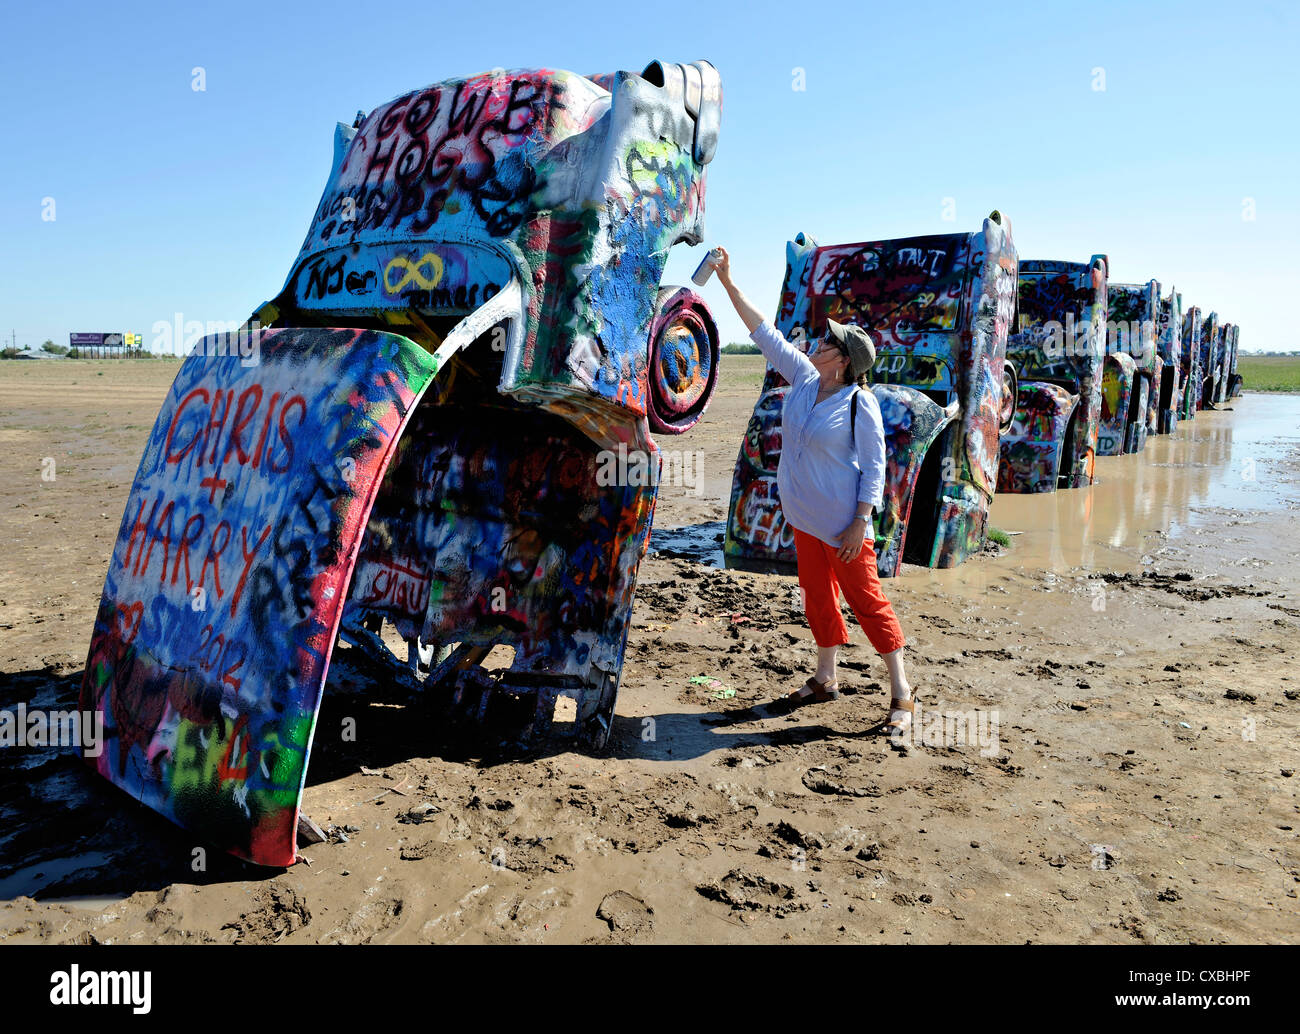 Cadillac Ranch, -art installation sculpture located on Route 66 in Amarillo Texas, with person spraying graffiti. Stock Photo